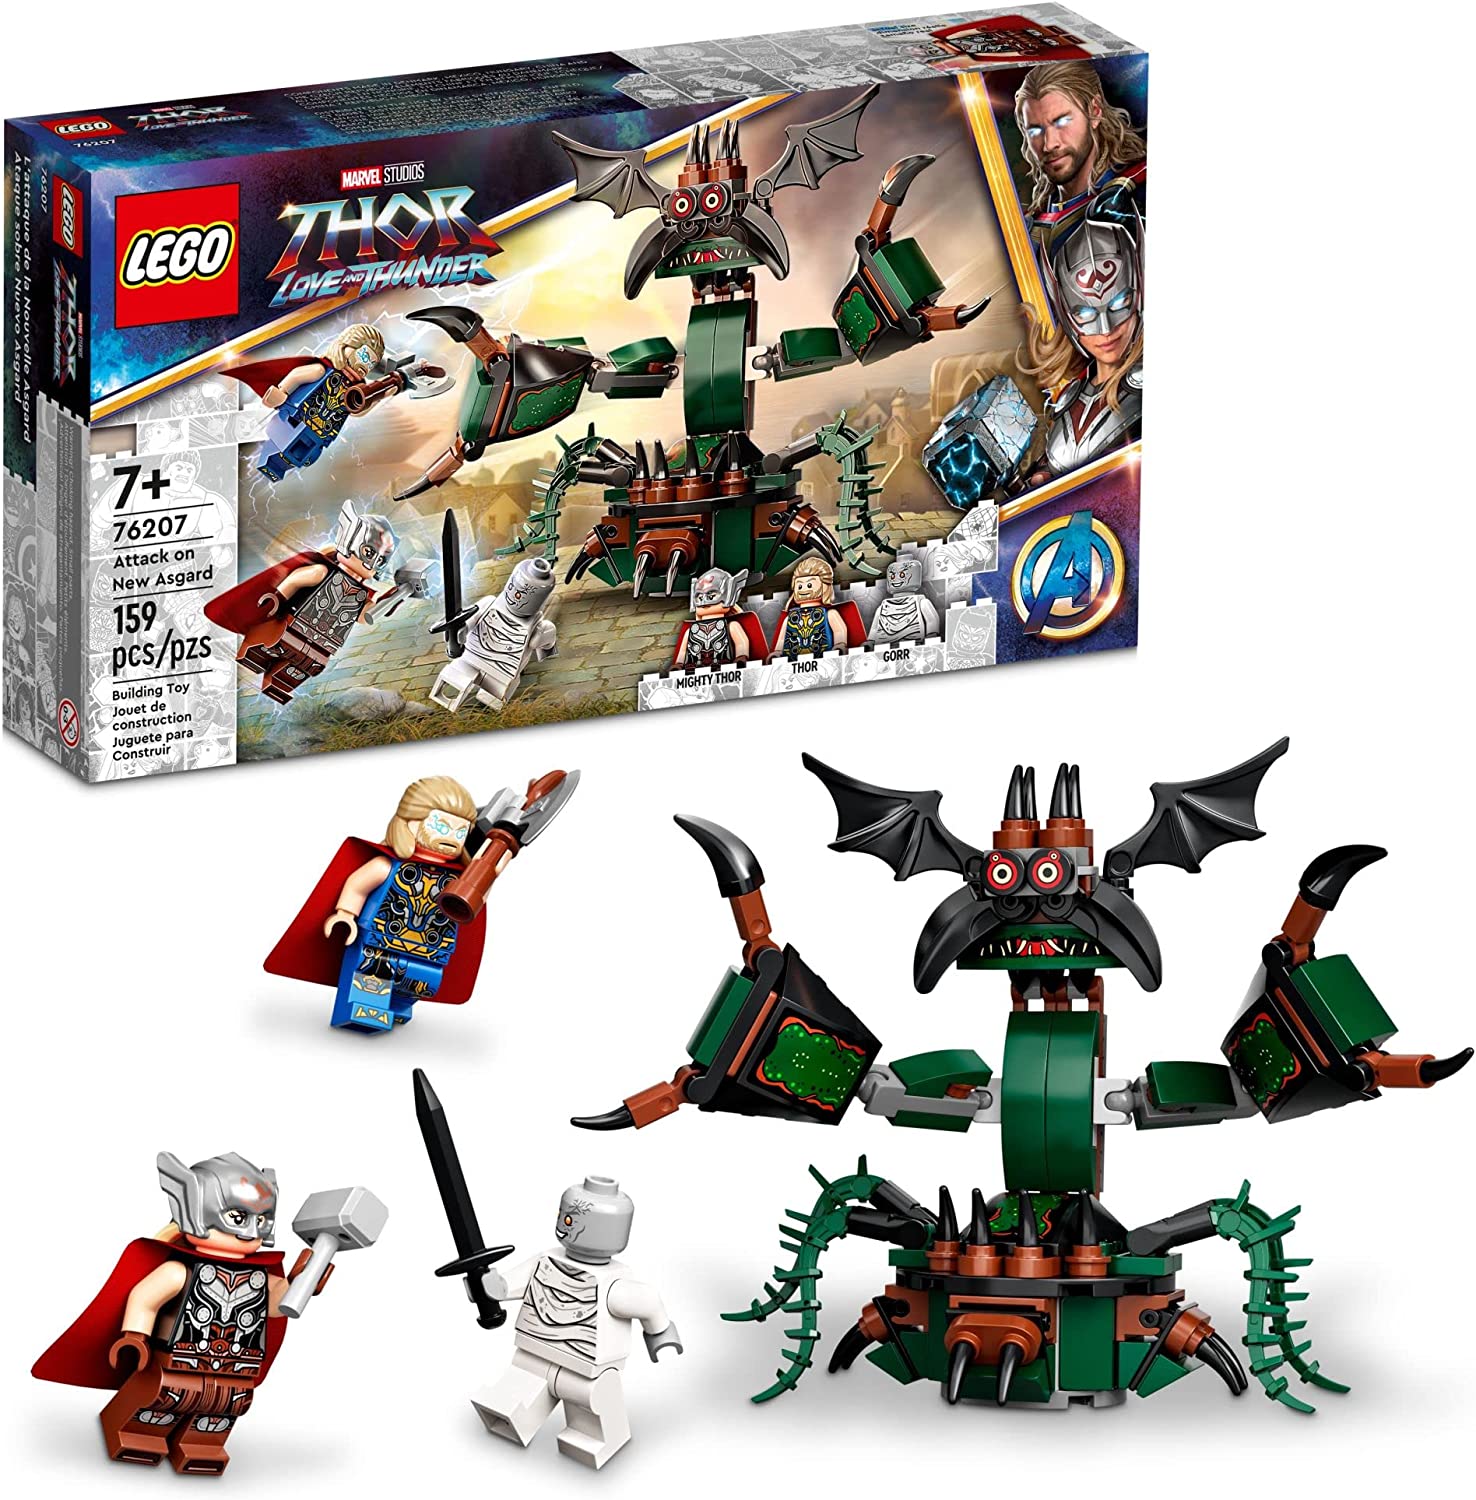 159-Piece LEGO Marvel Attack on New Asgard Building Kit $16 + Free Shipping w/ Prime or on orders over $25